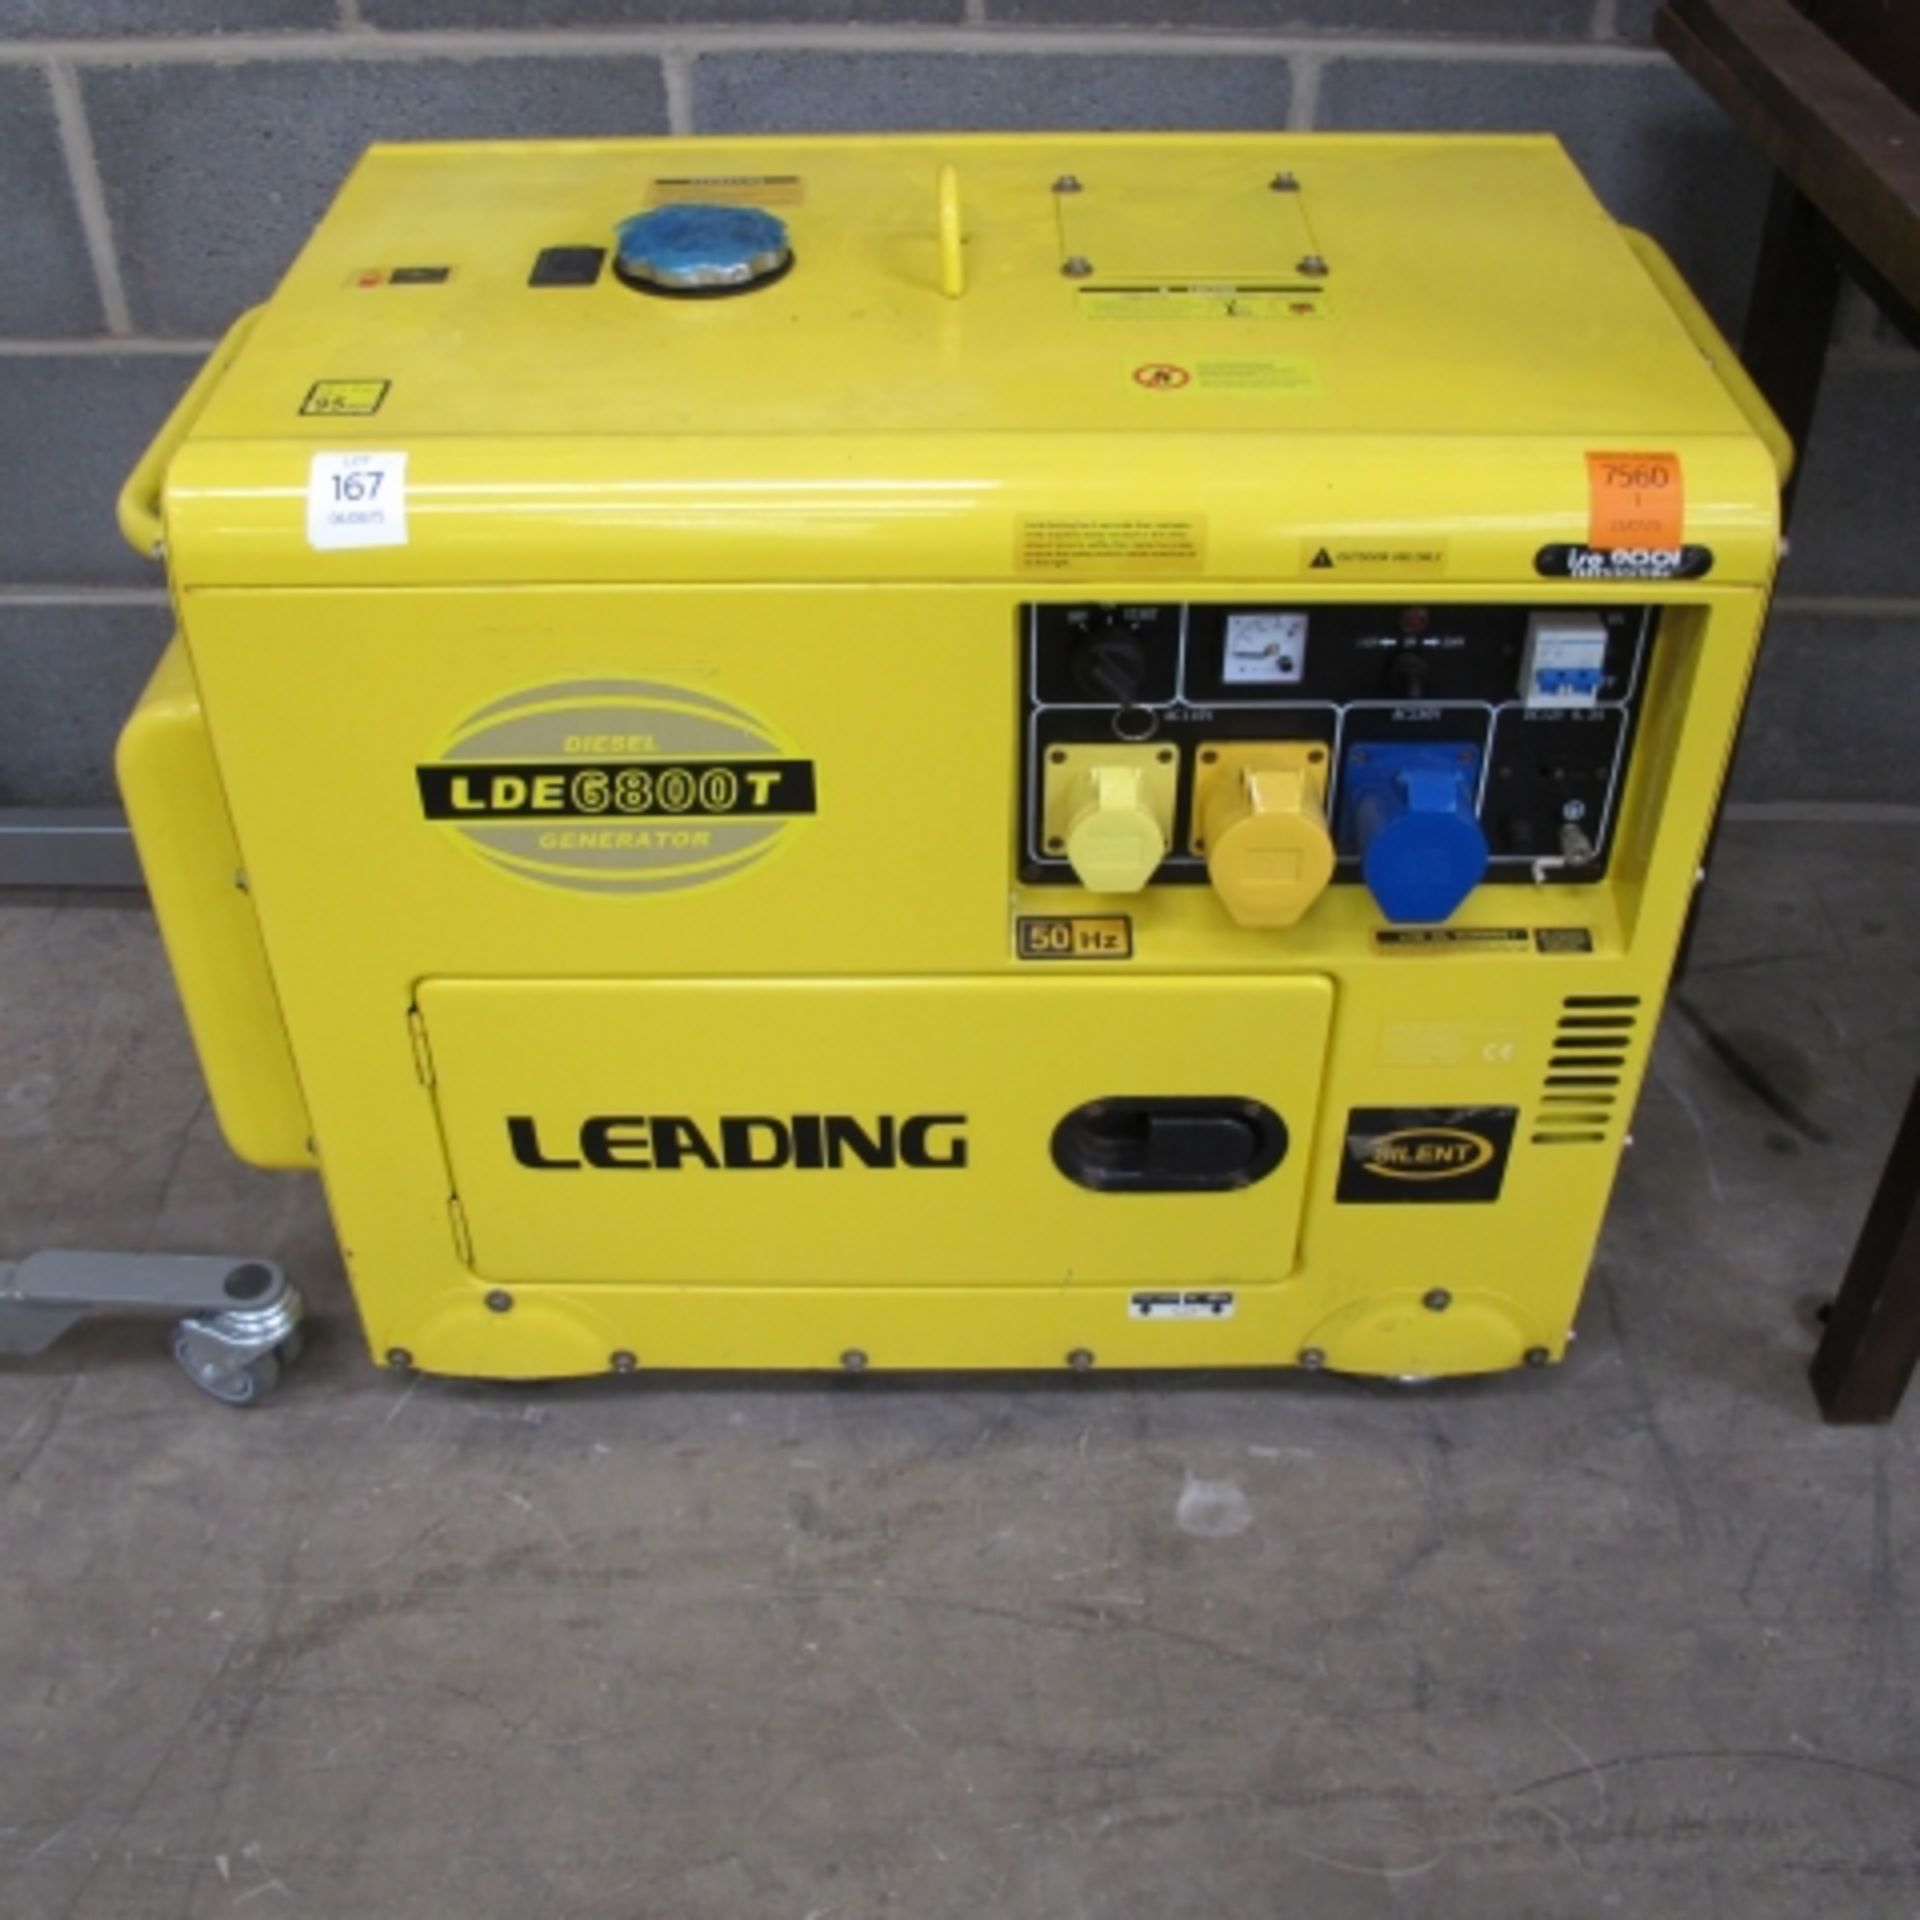 A Leading Diesel LDE6800T Generator, rated power 4.5-5 KVA, weight 177kg. Please note, there is a £5